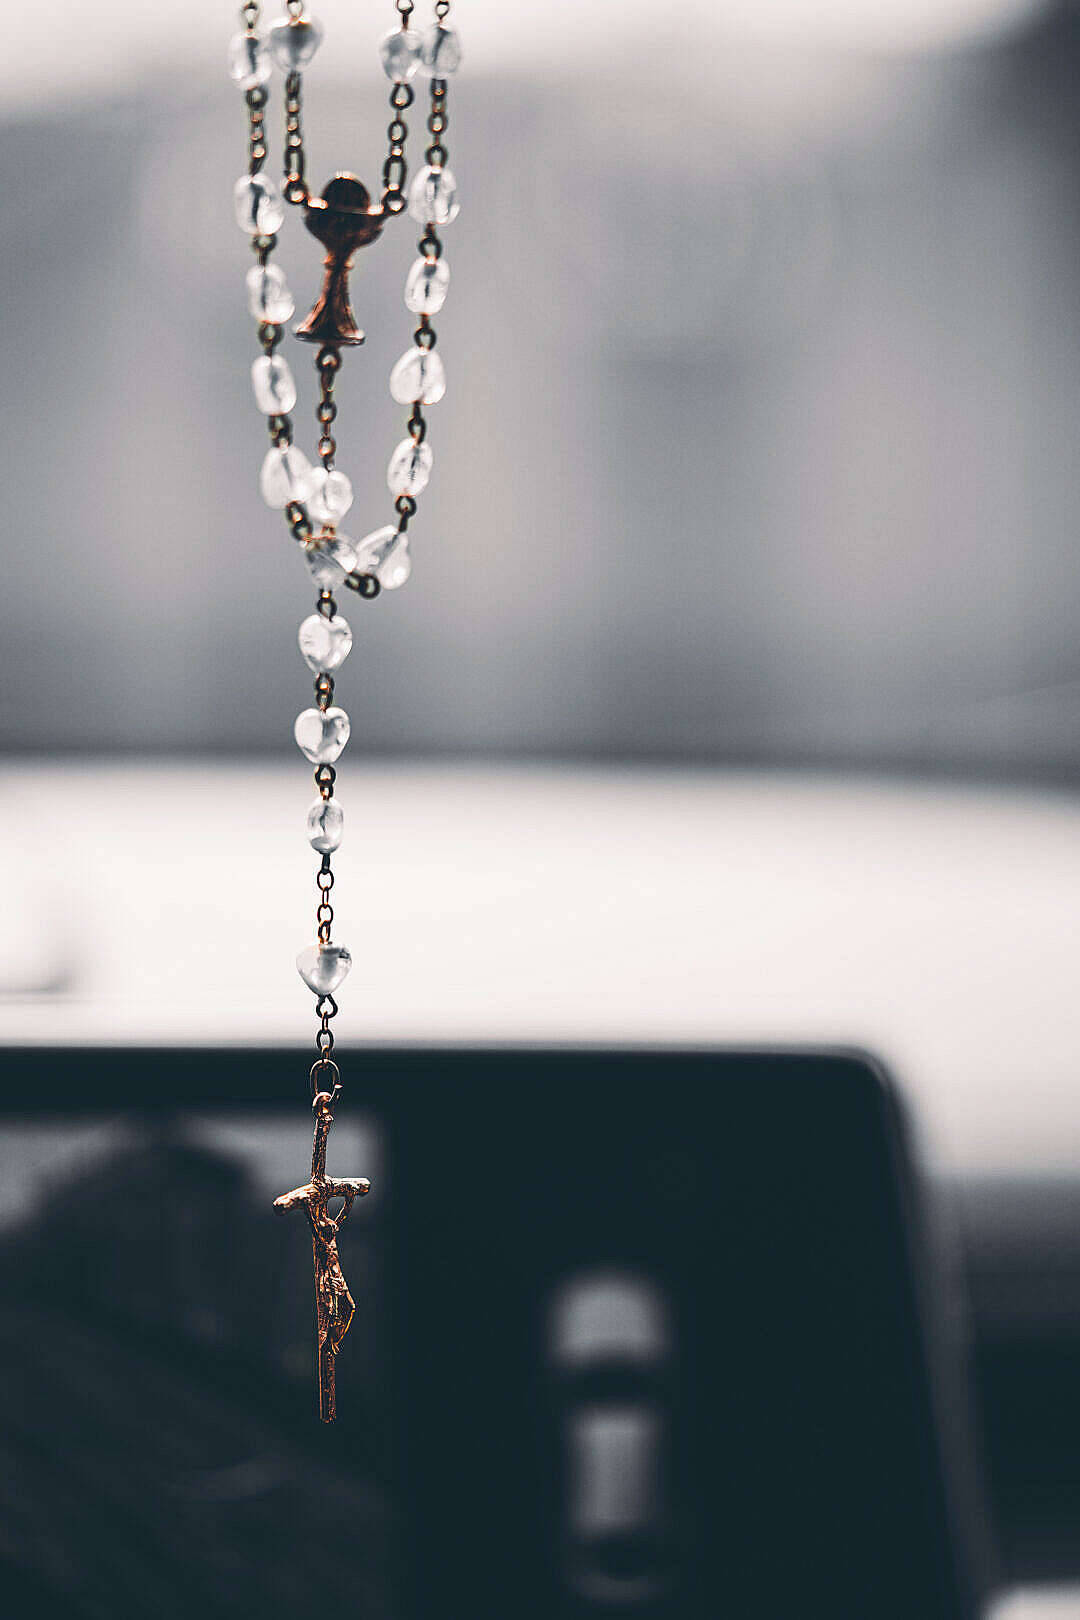 Hanging Rosary With Jesus On Cross Background